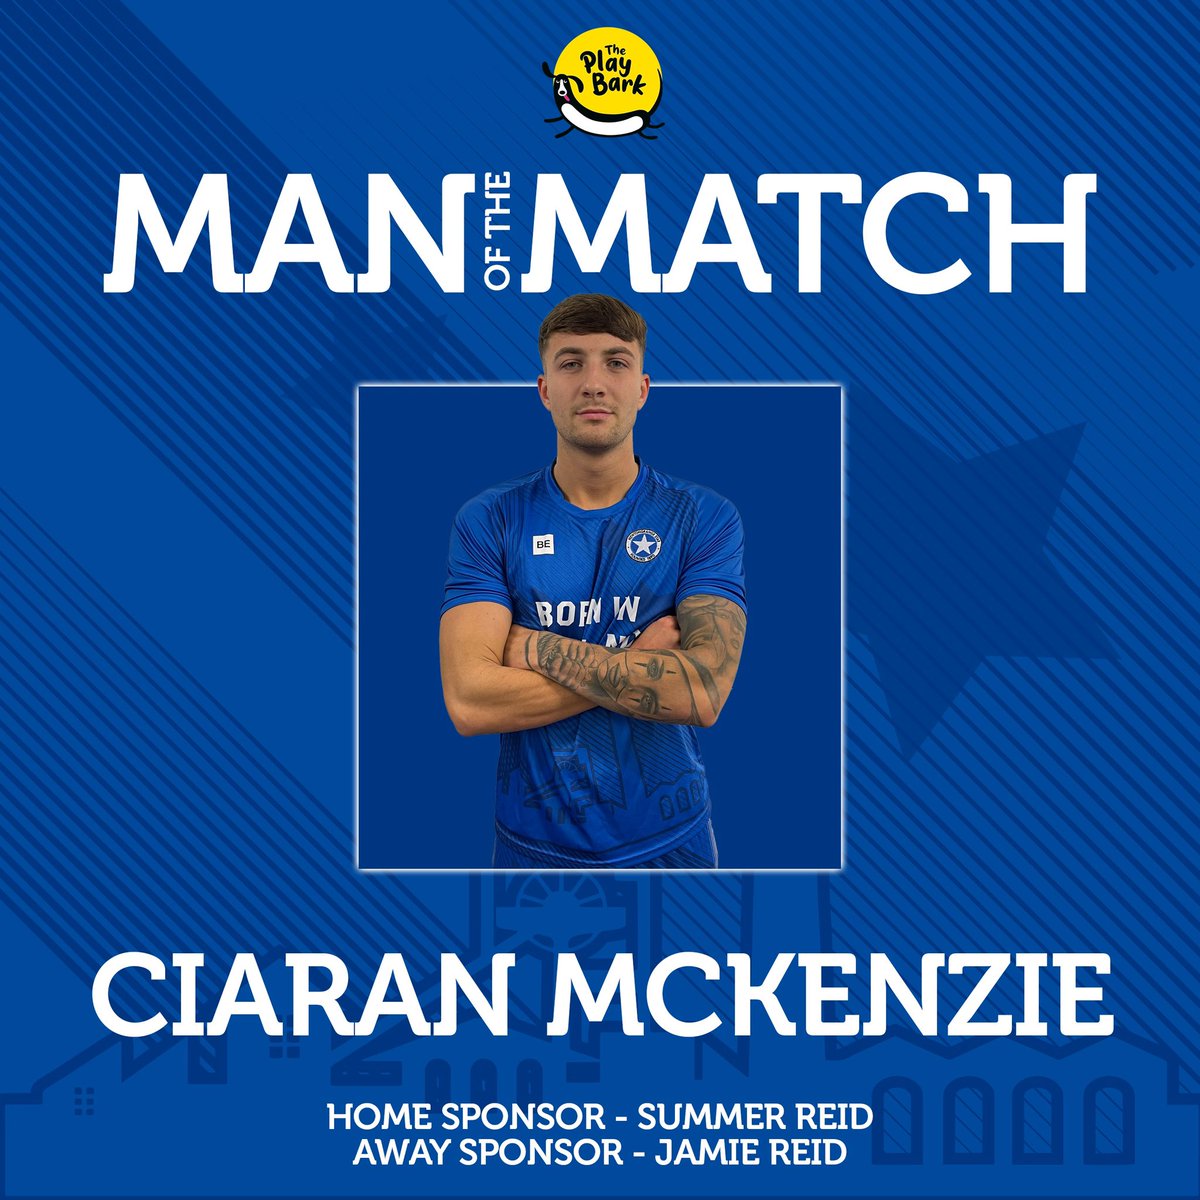 Tonight’s Playbark Man of the Match award goes to Ciaran McKenzie, another Rolls Royce performance from our number 4 ⭐️